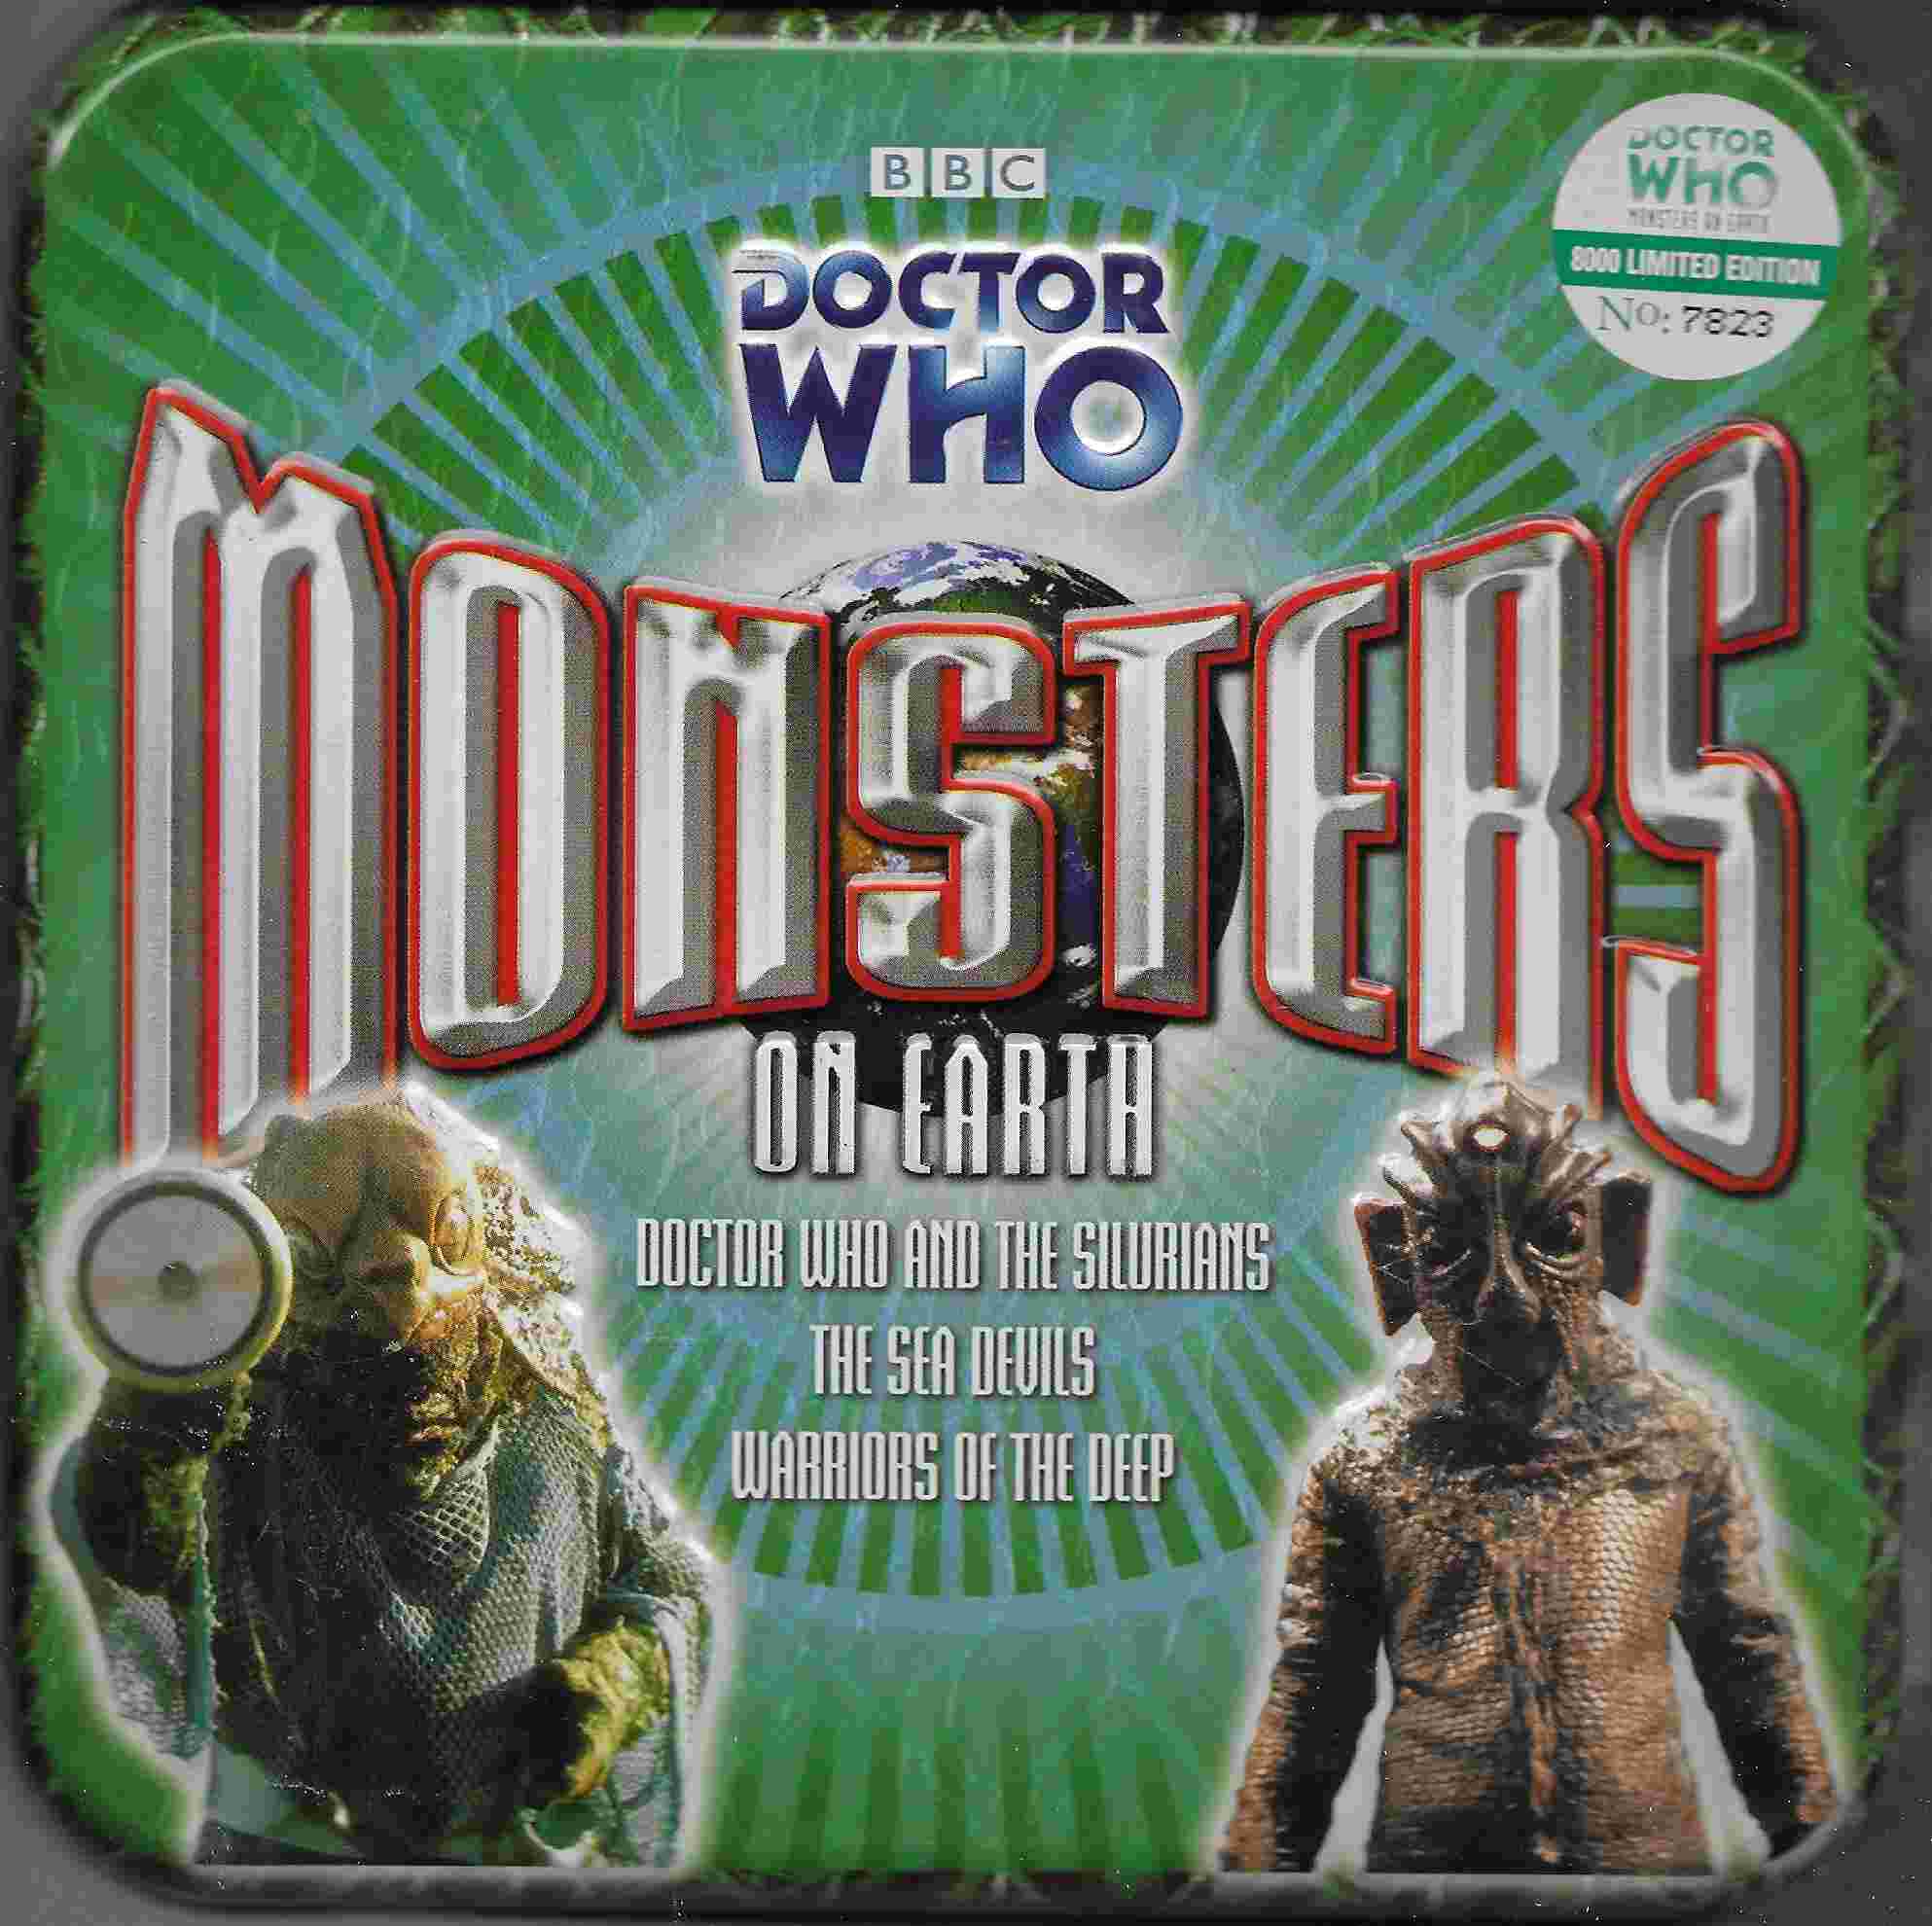 Picture of ISBN 1-846-07102-X Doctor Who - Monsters on Earth - Limited edition by artist Malcolm Hulke / Johnny Byrne from the BBC cds - Records and Tapes library